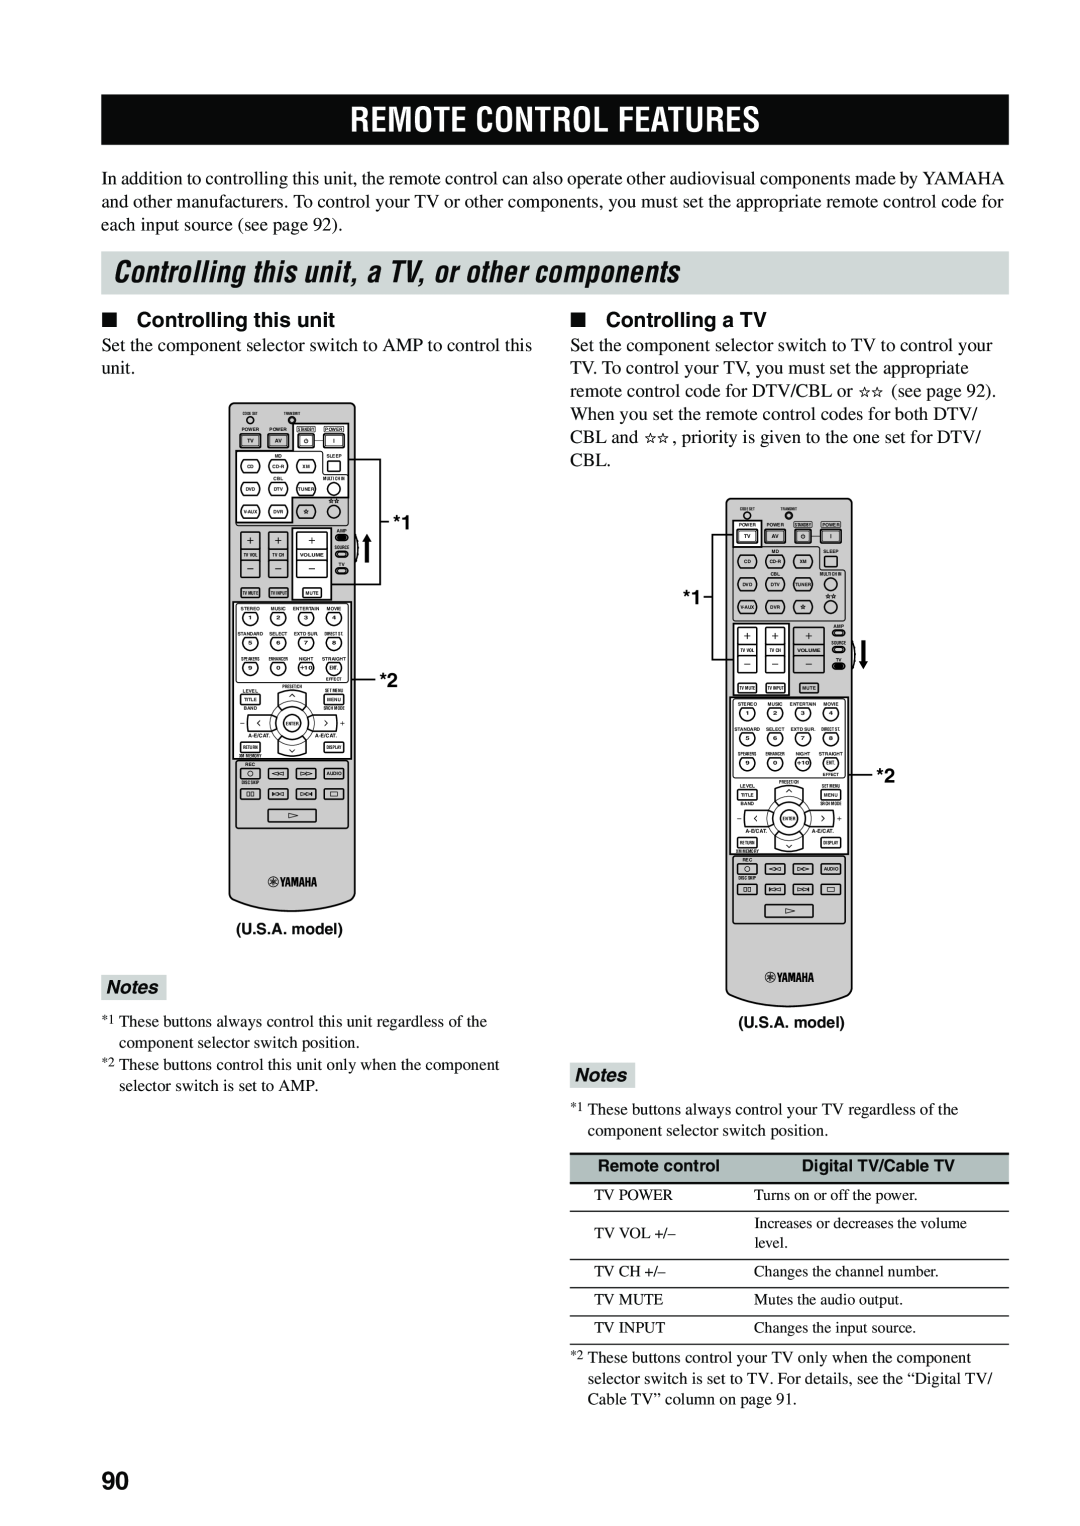 Yamaha RX-V559 Remote Control Features, Controlling this unit, a TV, or other components, Controlling a TV, Notes 